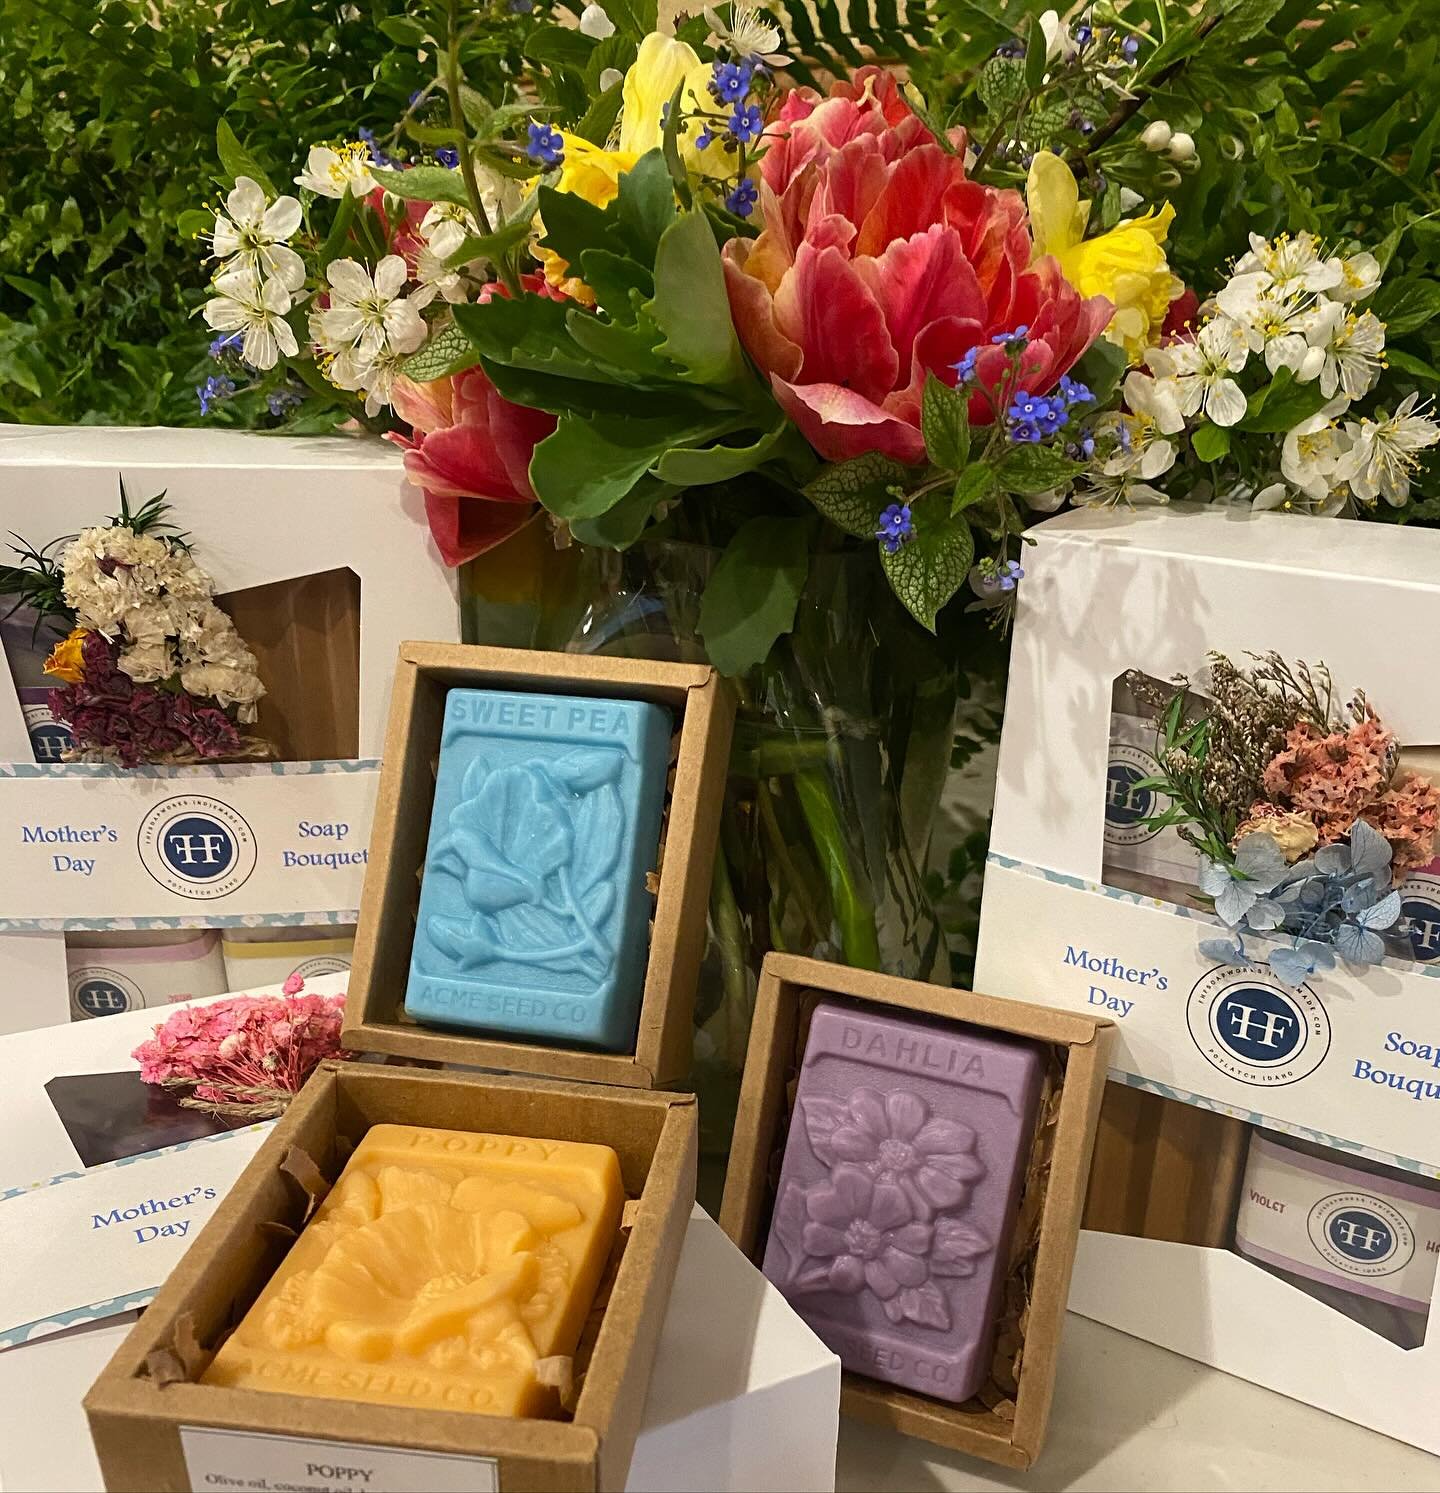 💐 Looking for a gift for Mom this Mother&rsquo;s Day?

@featheredhorsesfarm created these lovely Mother&rsquo;s Day theme gift boxes filled with three flower fragranced soaps, a pretty wood soap dish tied with a tiny dried flower bouquet, and indivi